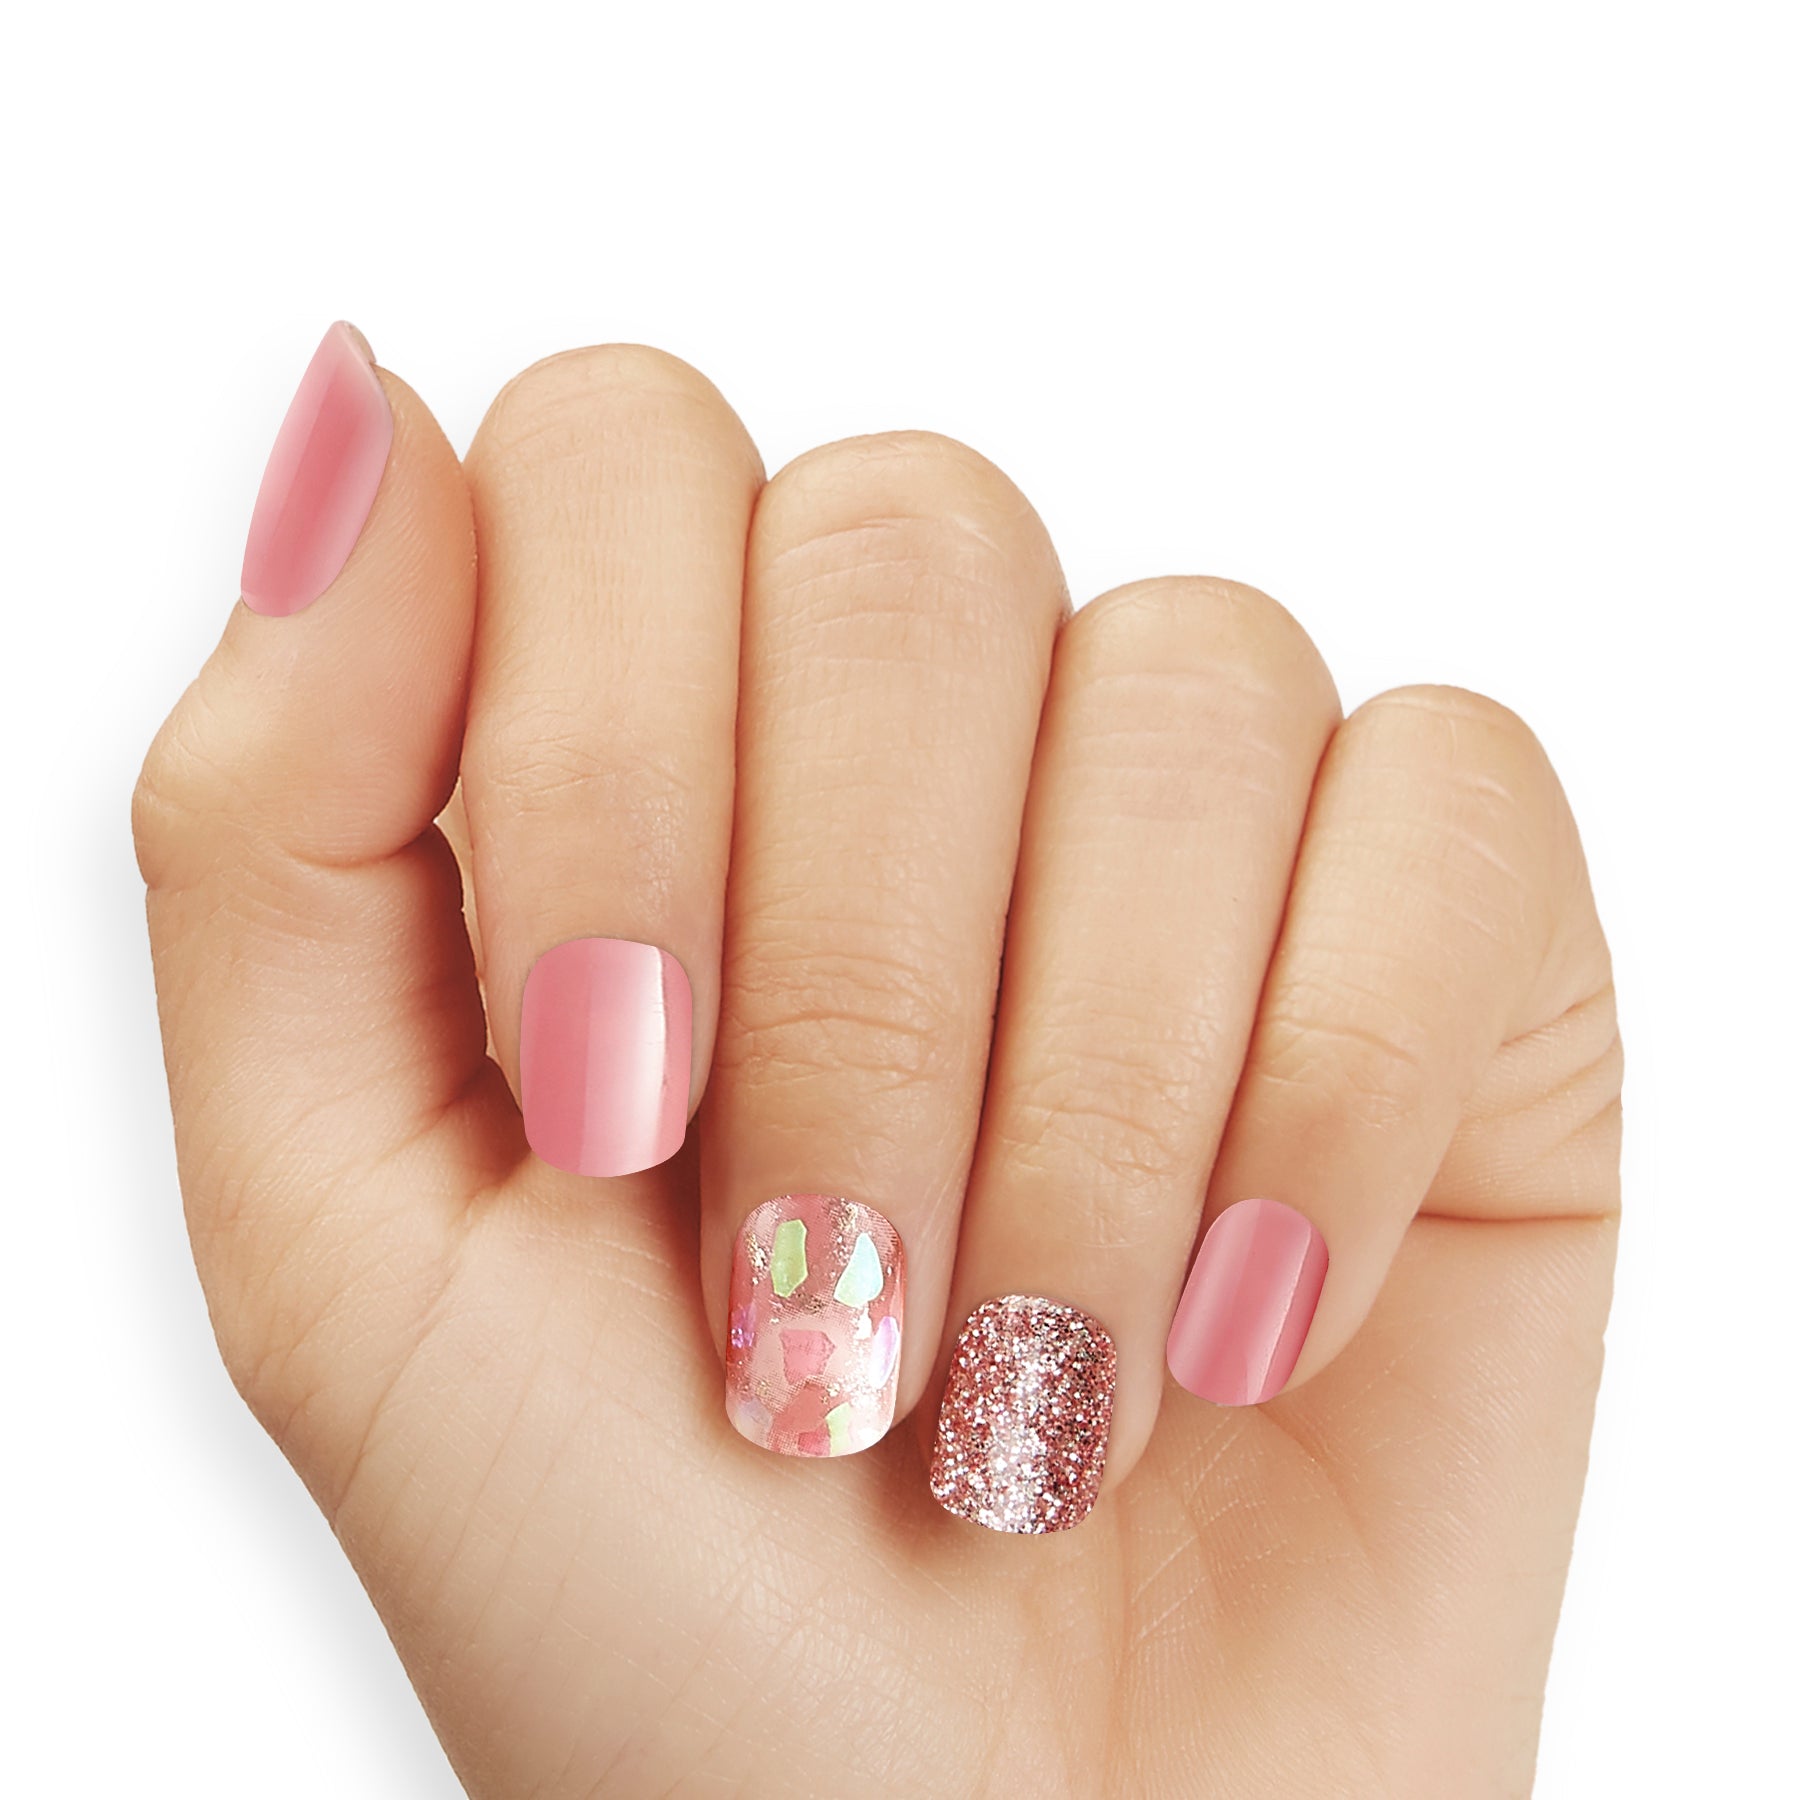 Nail Art │ Pink Satin Paisley manicure done with Silicone Mat